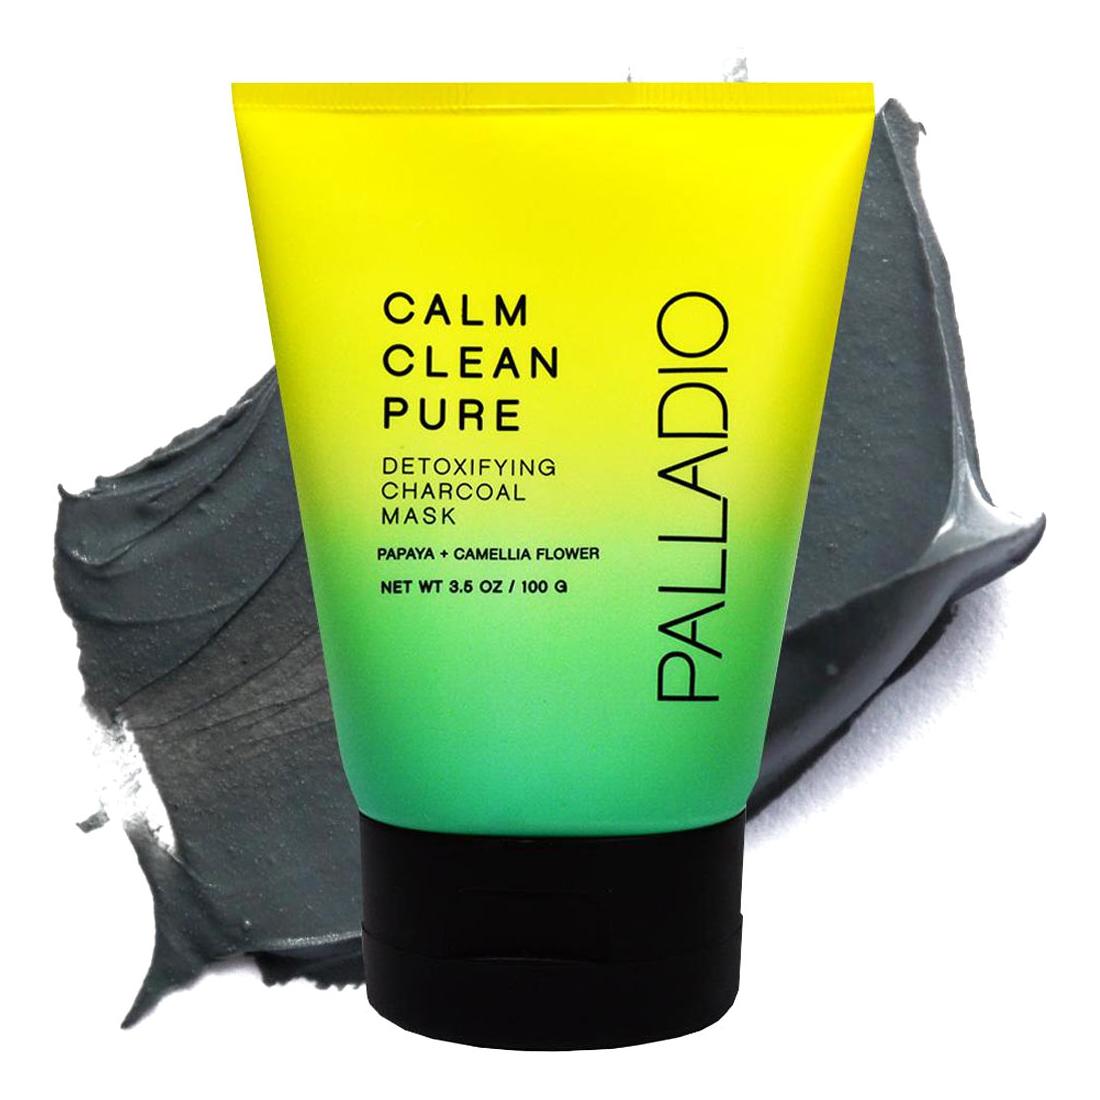 Palladio - Calm Clean Pure Detoxifying Charcoal Mask